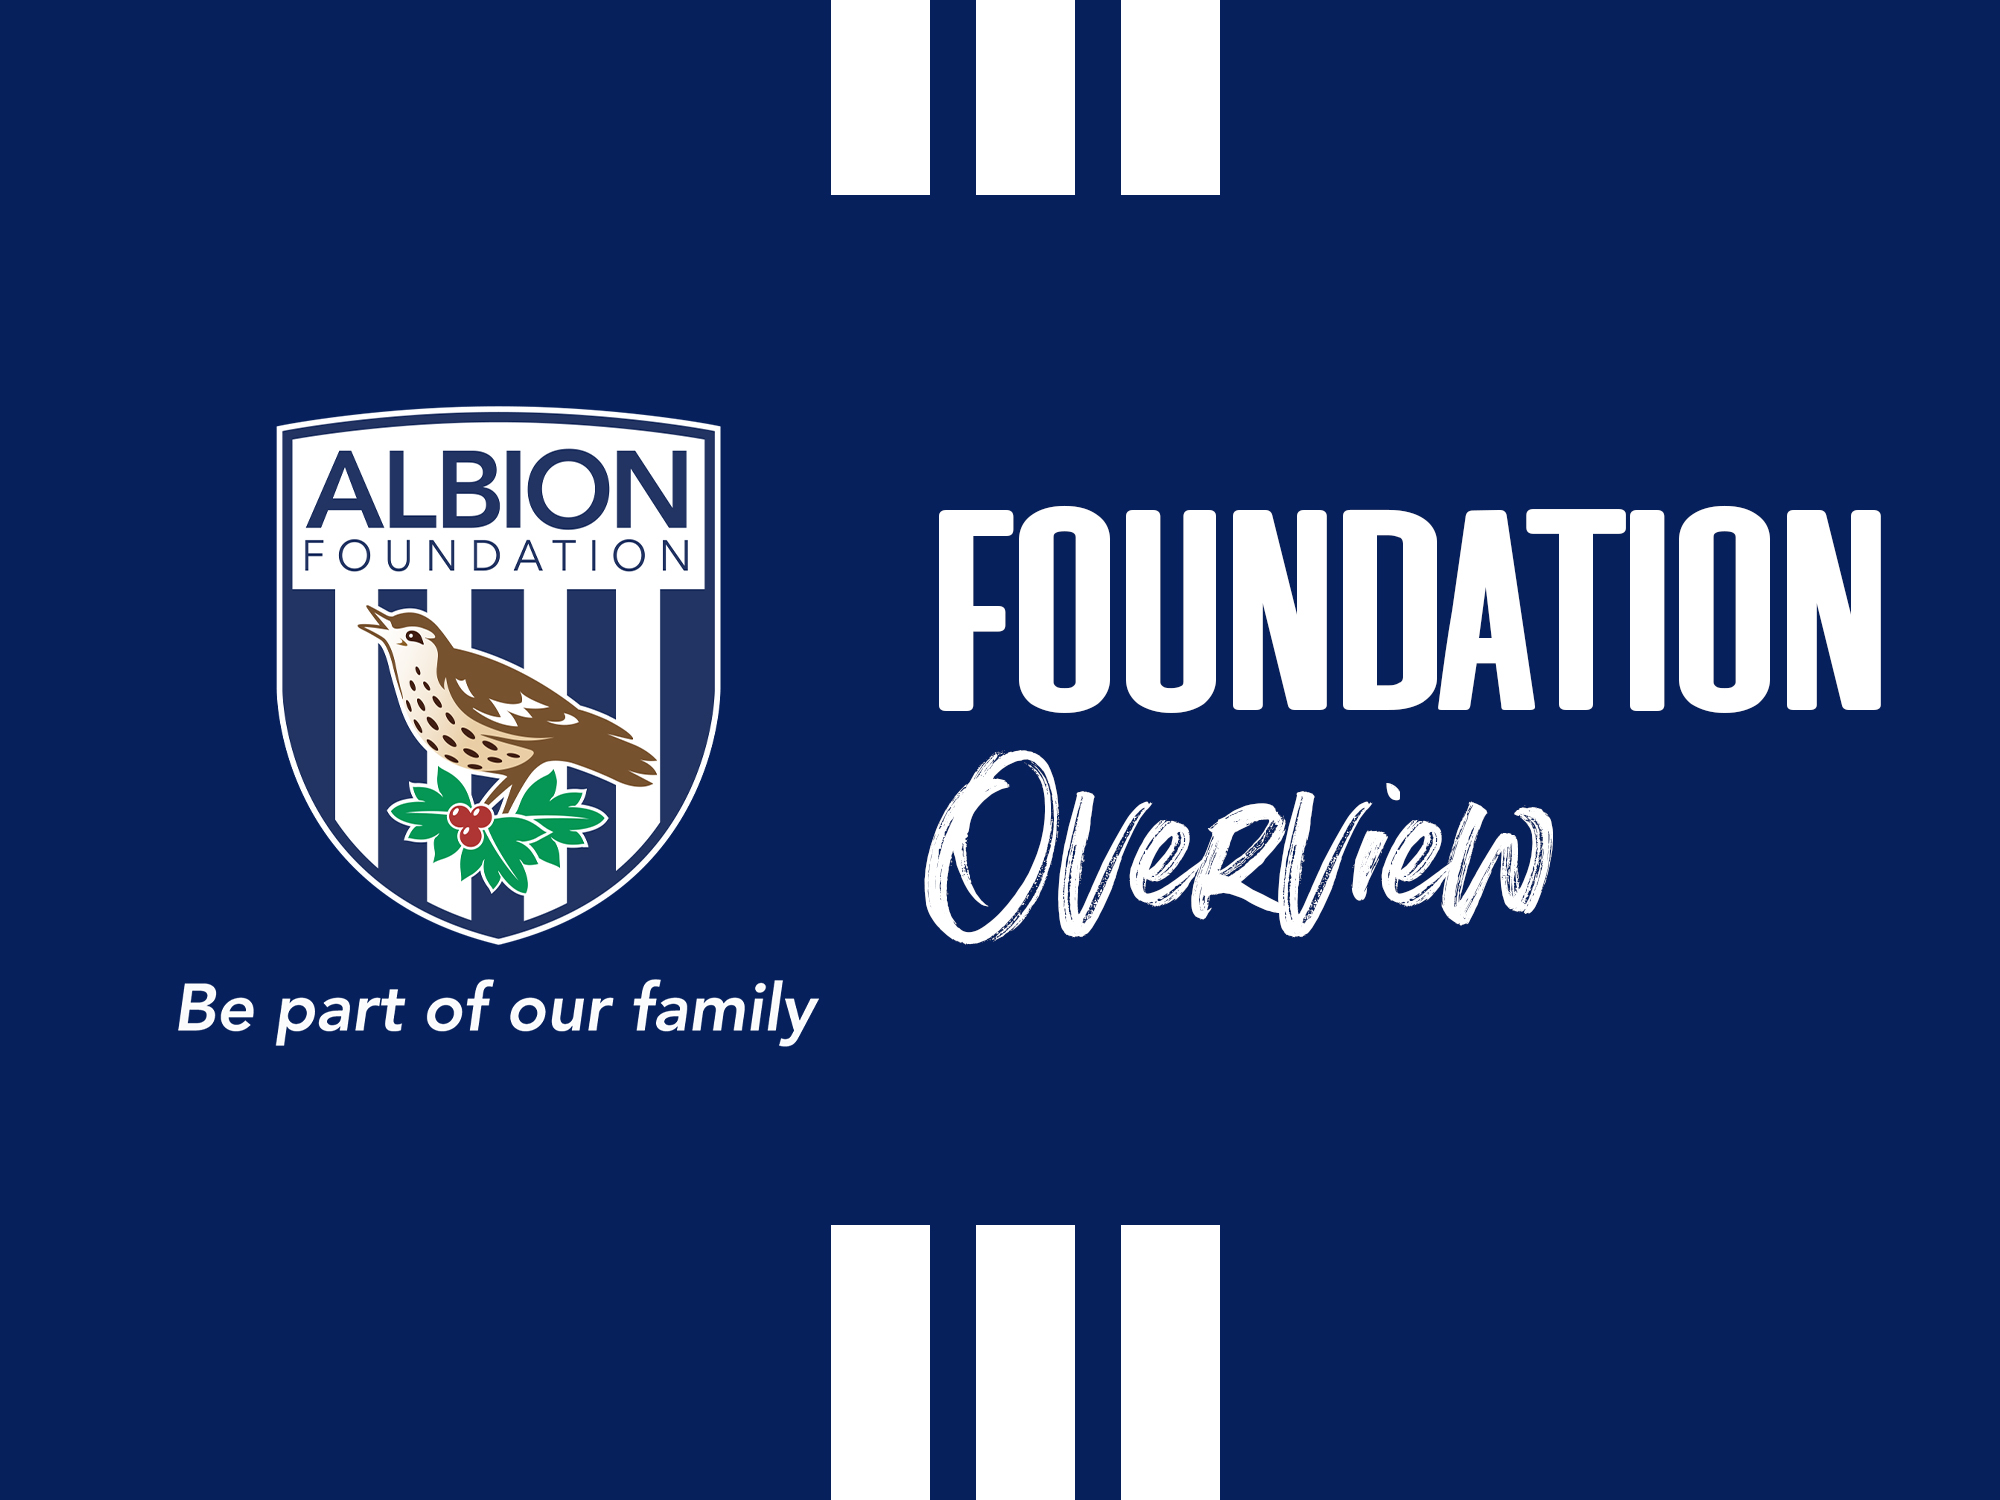 The Albion Foundation Overview